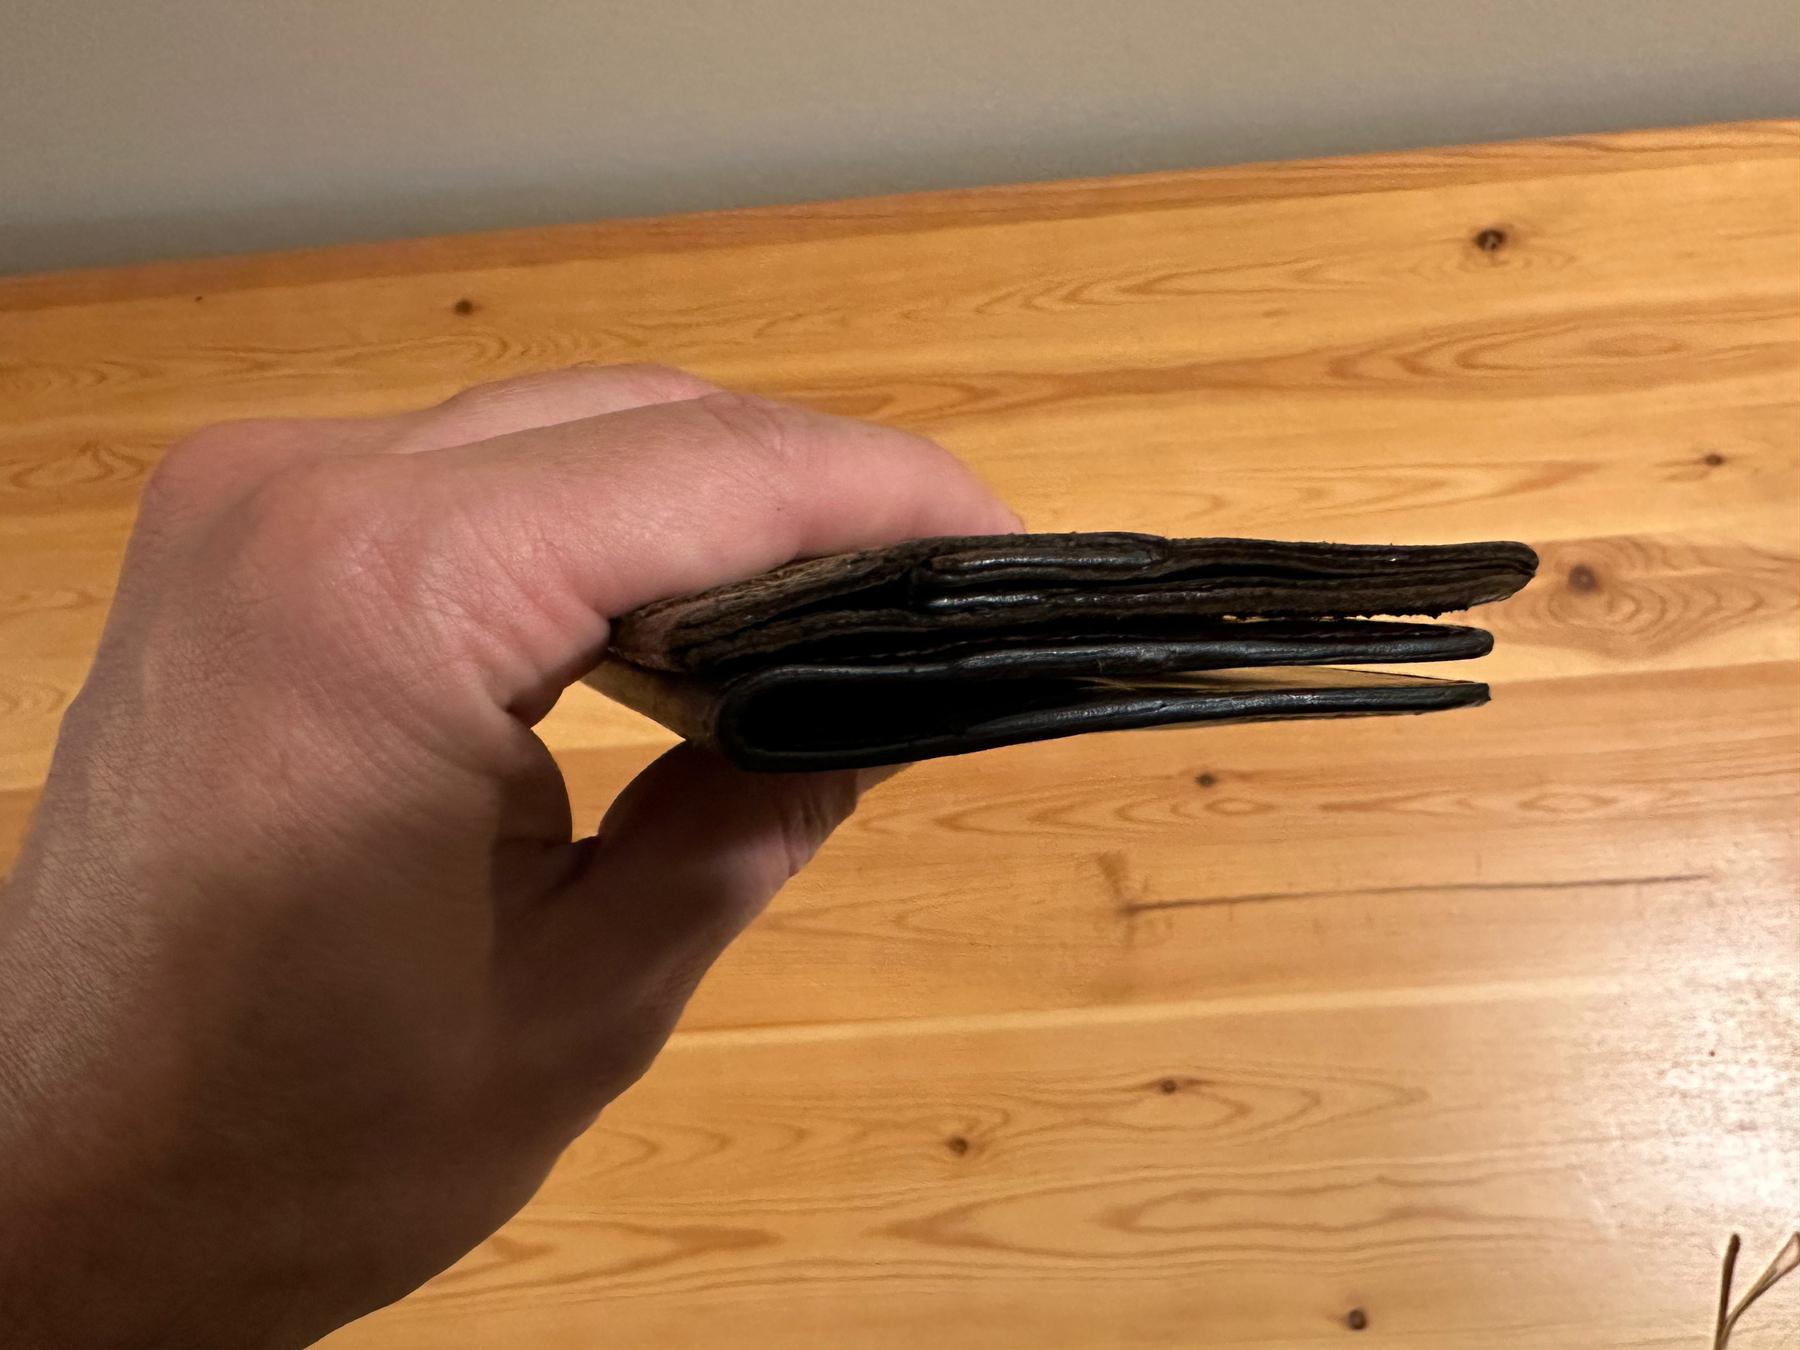 Original leather wallet and replica on top of eachother to show the similar thickness of both.